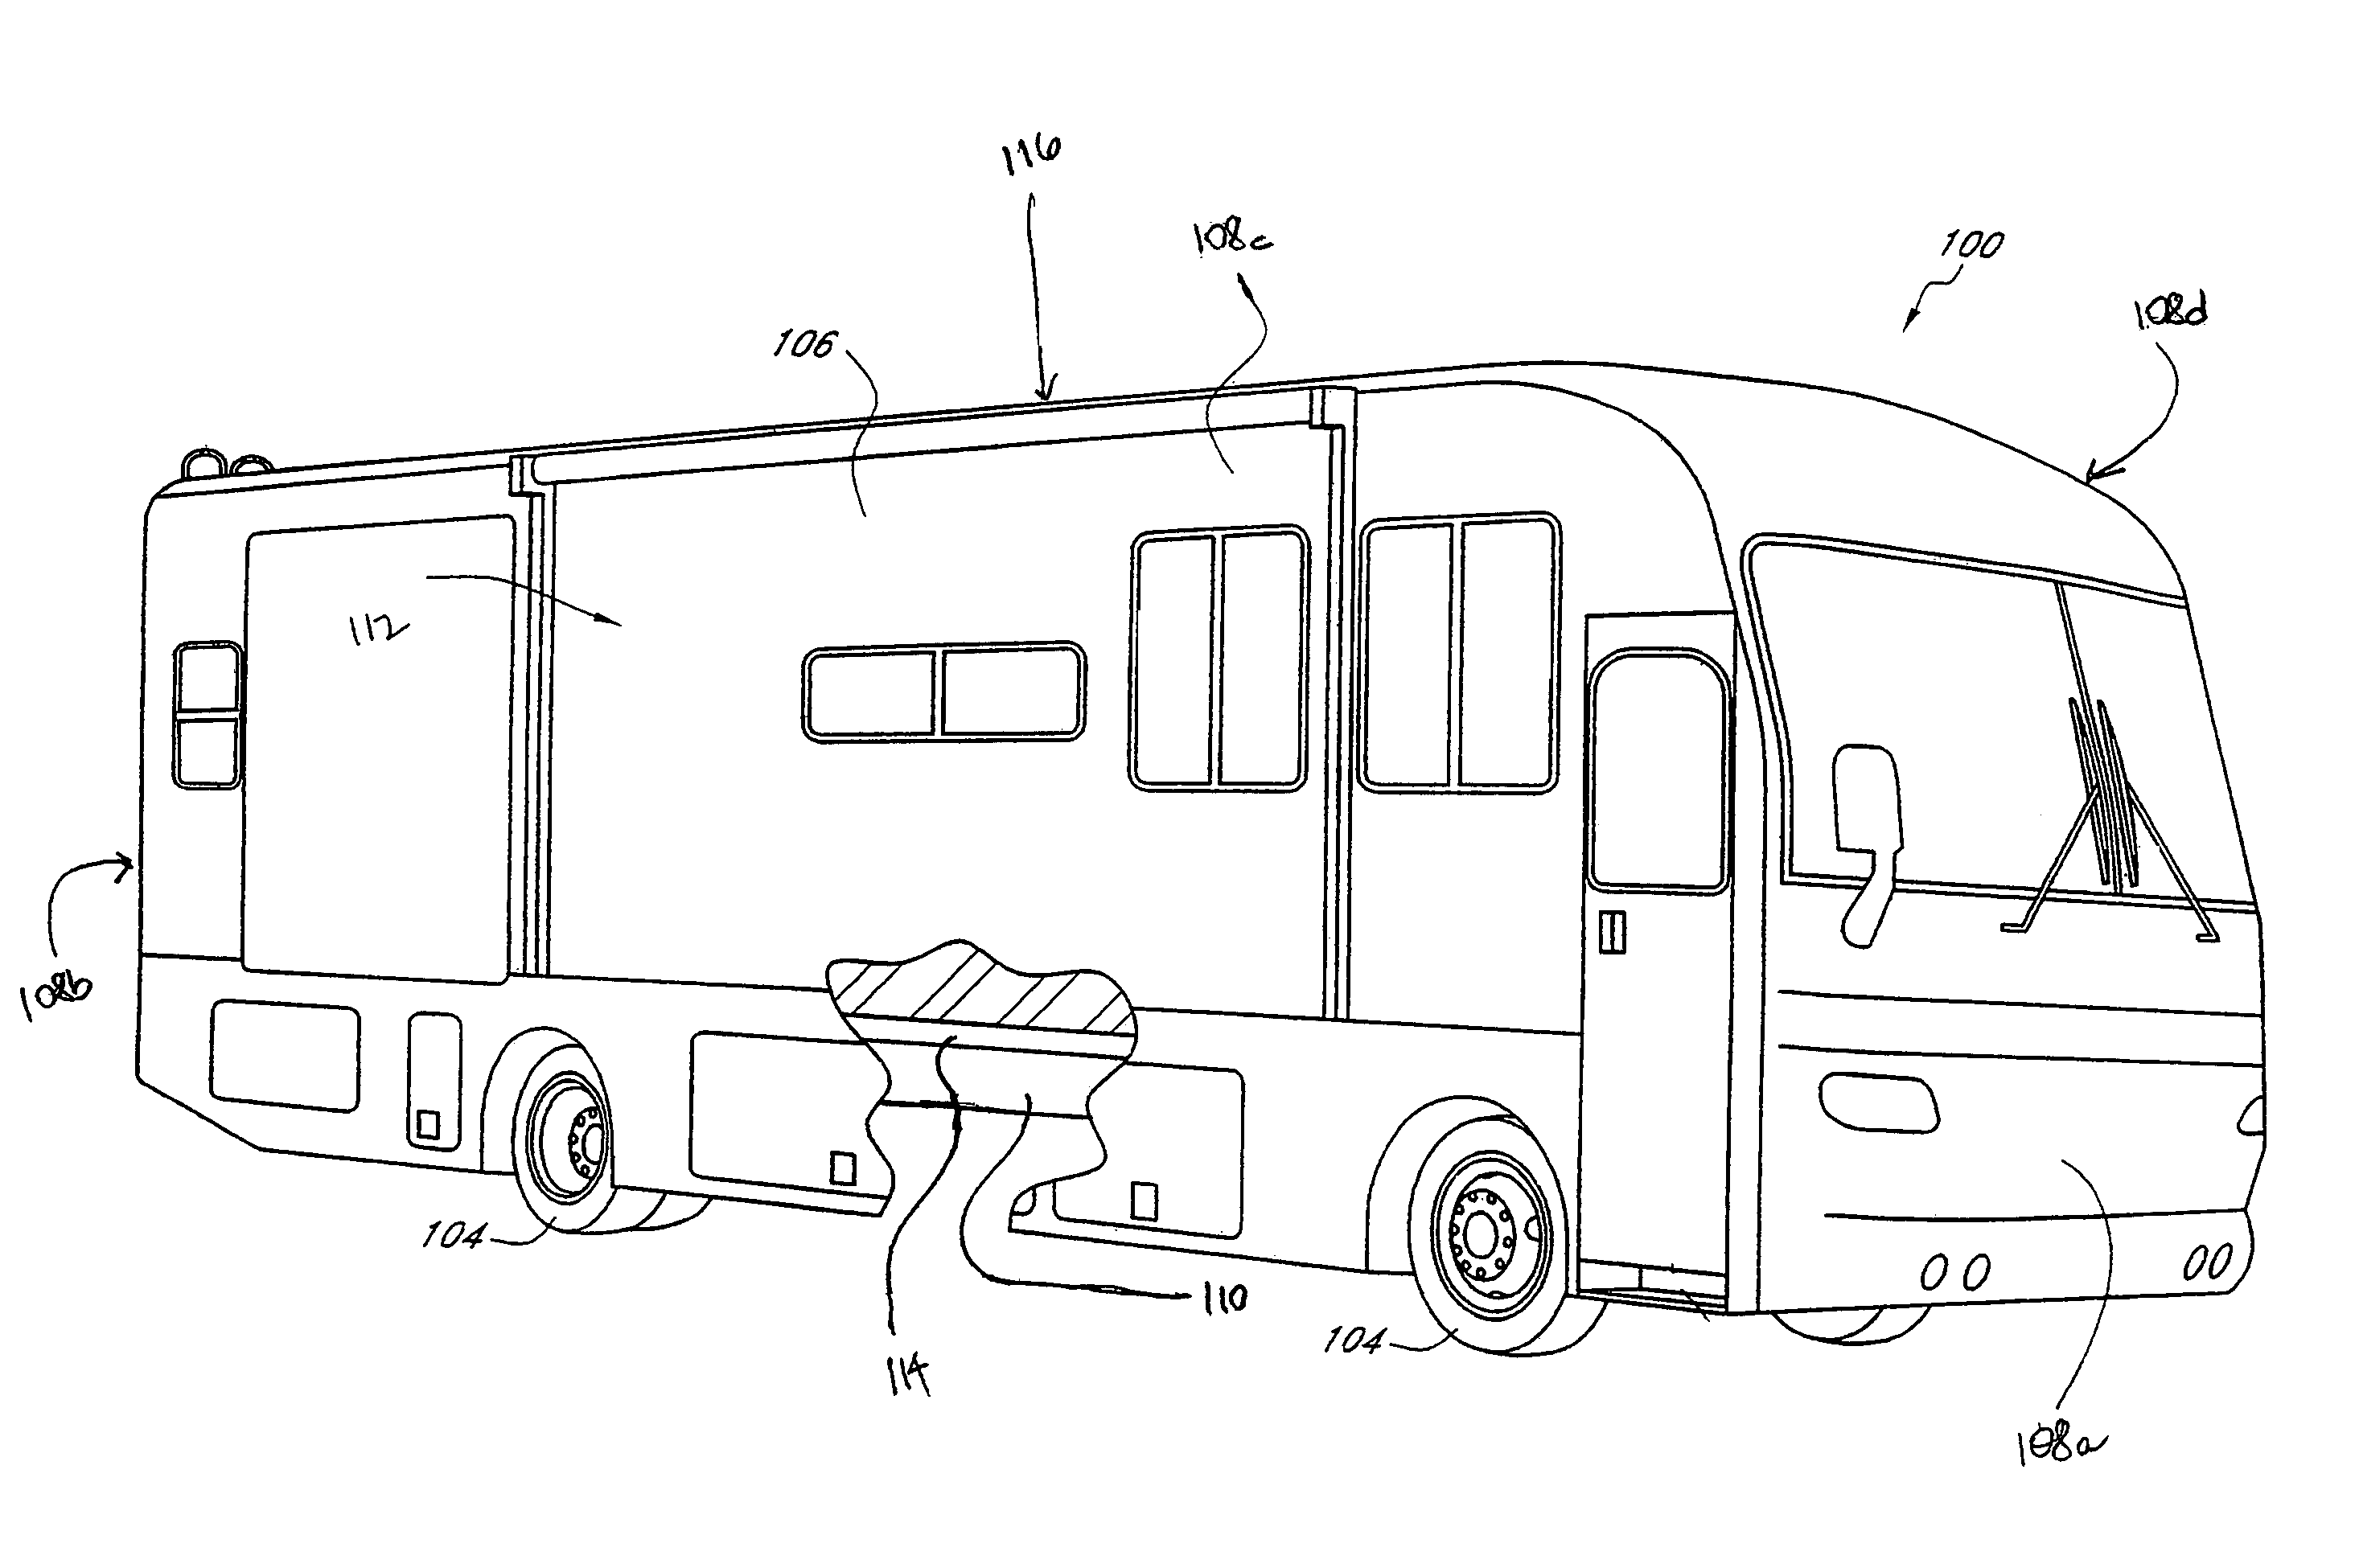 Slide-out mechanism for recreational vehicles